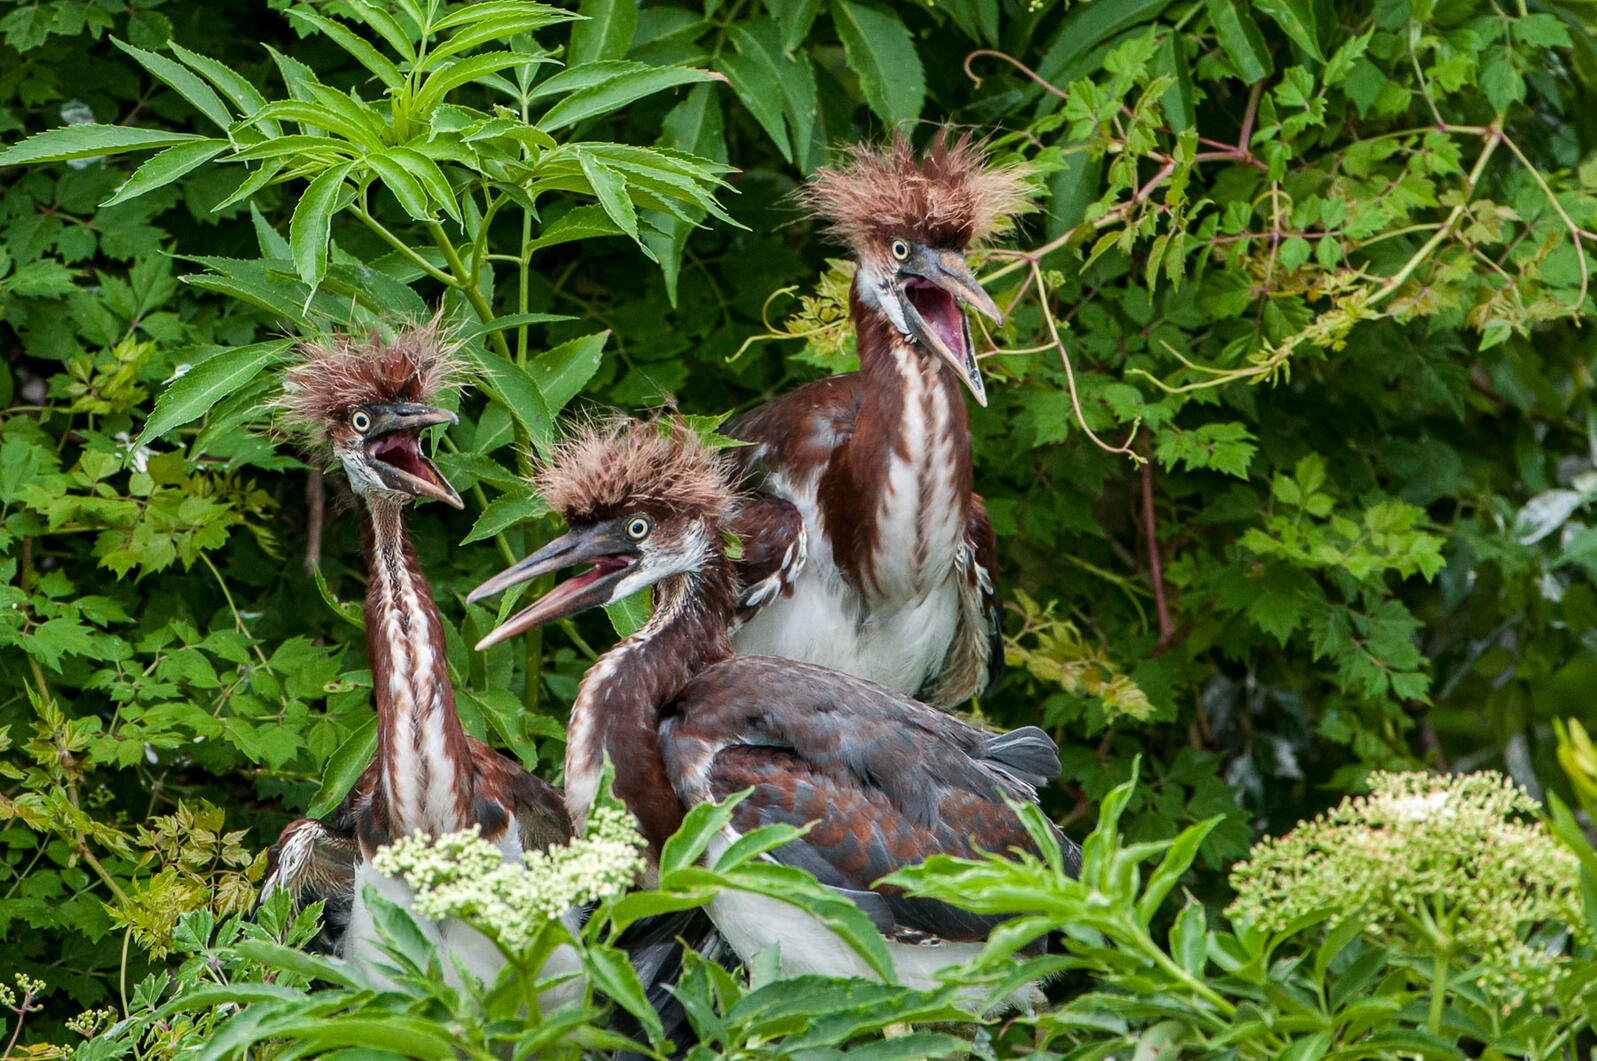 Three juvenile Tricolored Herons sitting in a nest